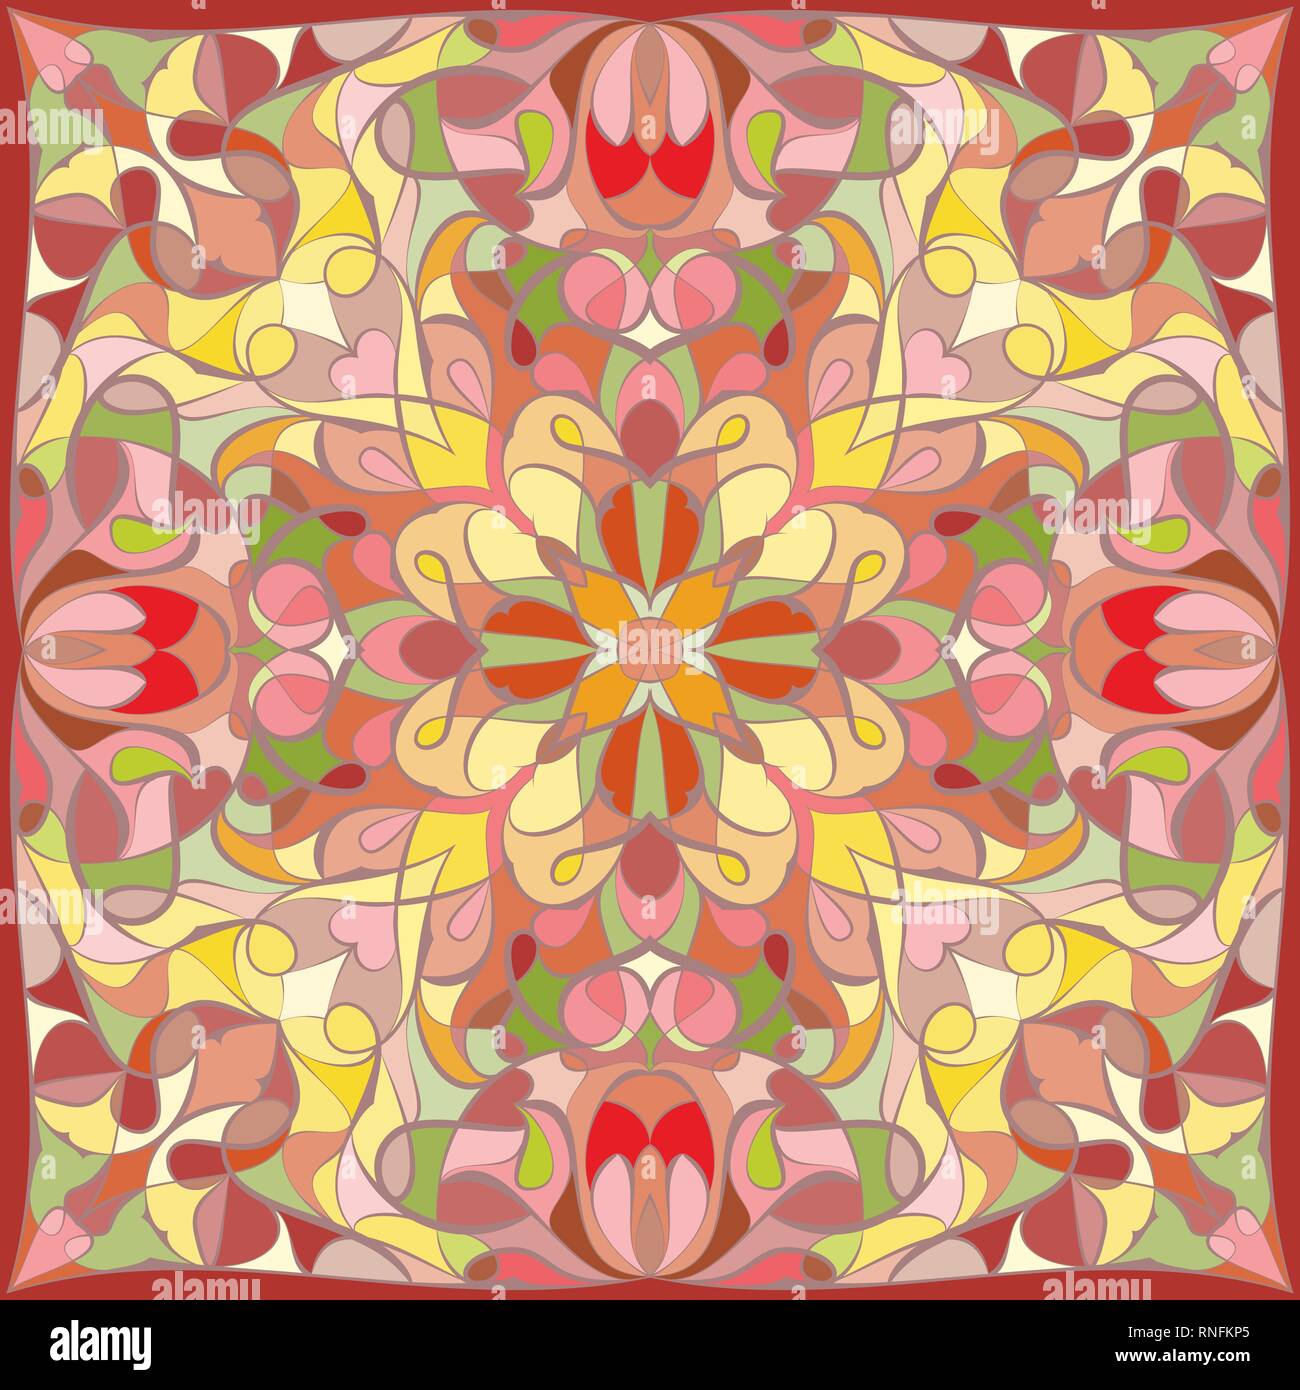 Bright colored handkerchief with abstract pattern for silk scarf or shawl. Stock Vector